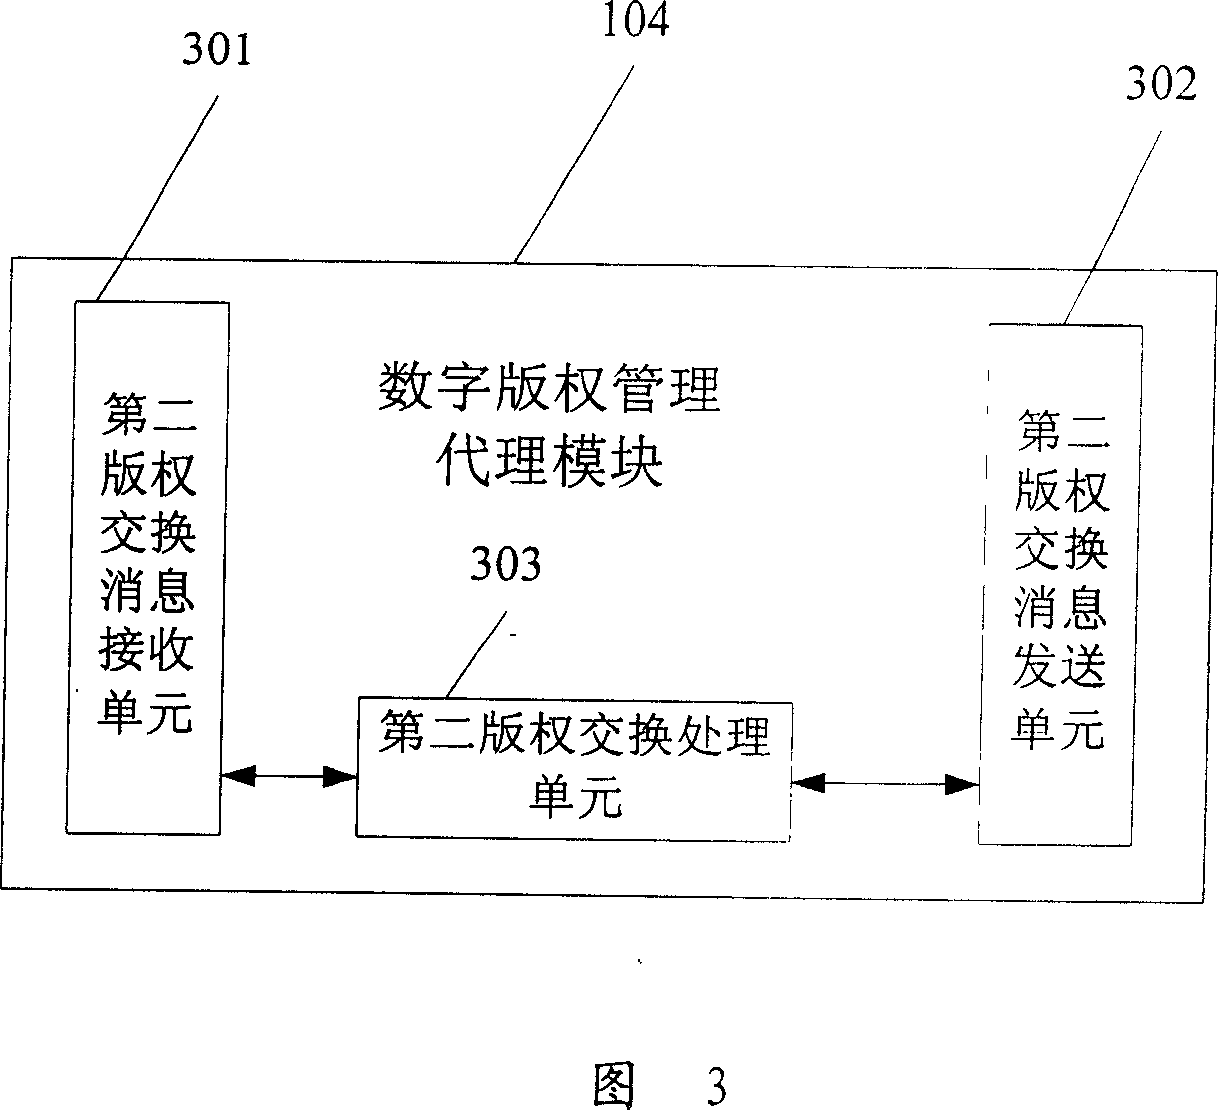 Method and system for replacing copyright object in digital copyright management system